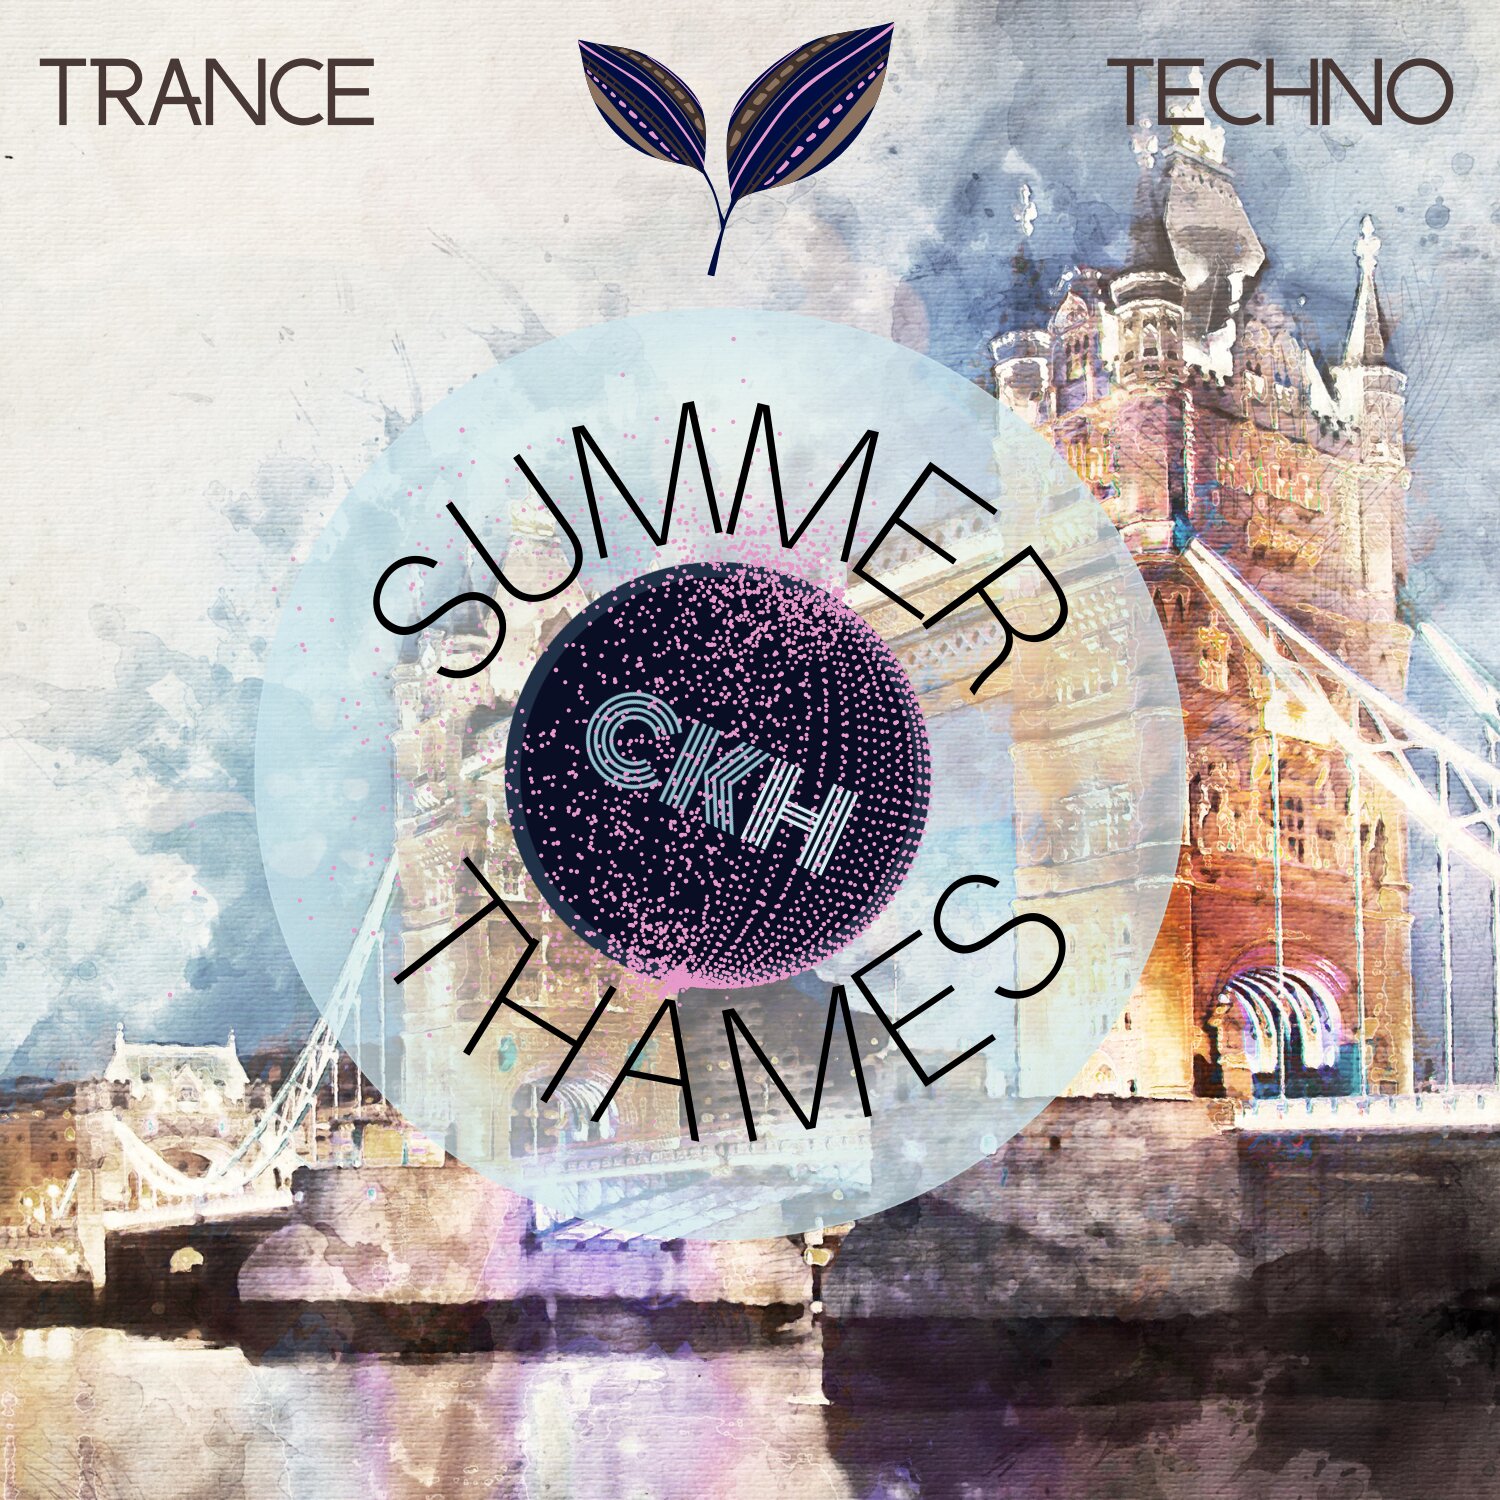 United Kingdom based international electronic music creation team ‘CKH’ have released their new DJ set ‘Summer Thames’ – Now on the playlist at 8 PM every day!